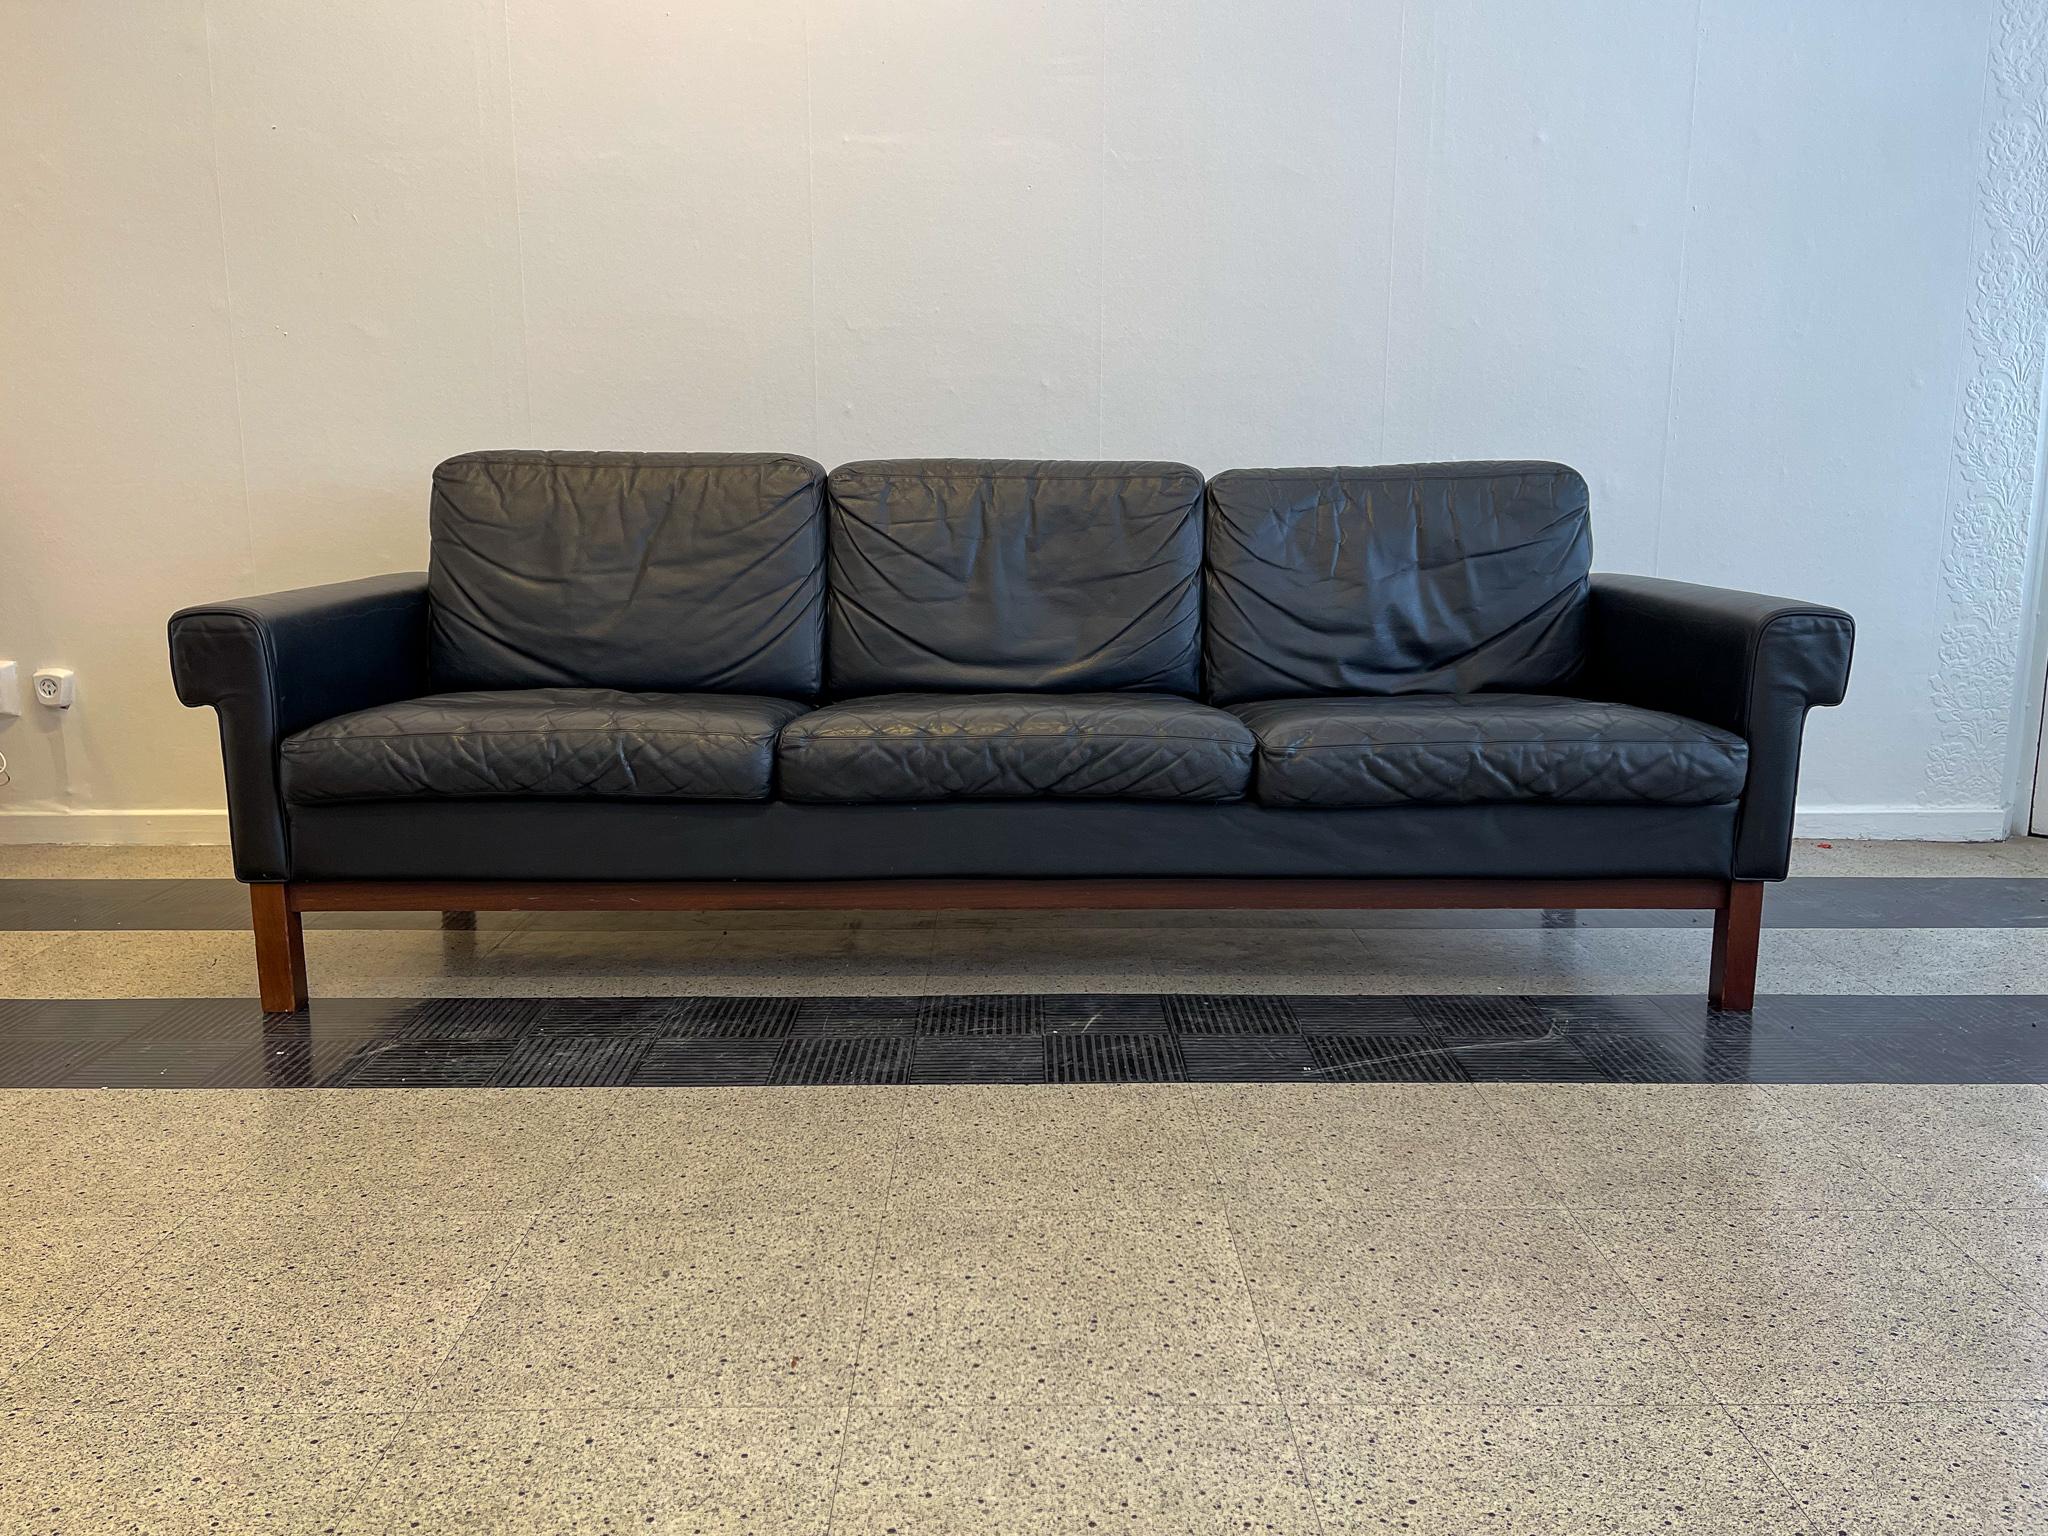 This sofa that was designed and manufactured in 1966 for Ikea and designed by Åke Fribýter. It has the name Gotland and refers to one of Sweden’s counties. It made as a quality statement piece for Ikea and was rewarded with many design prices during